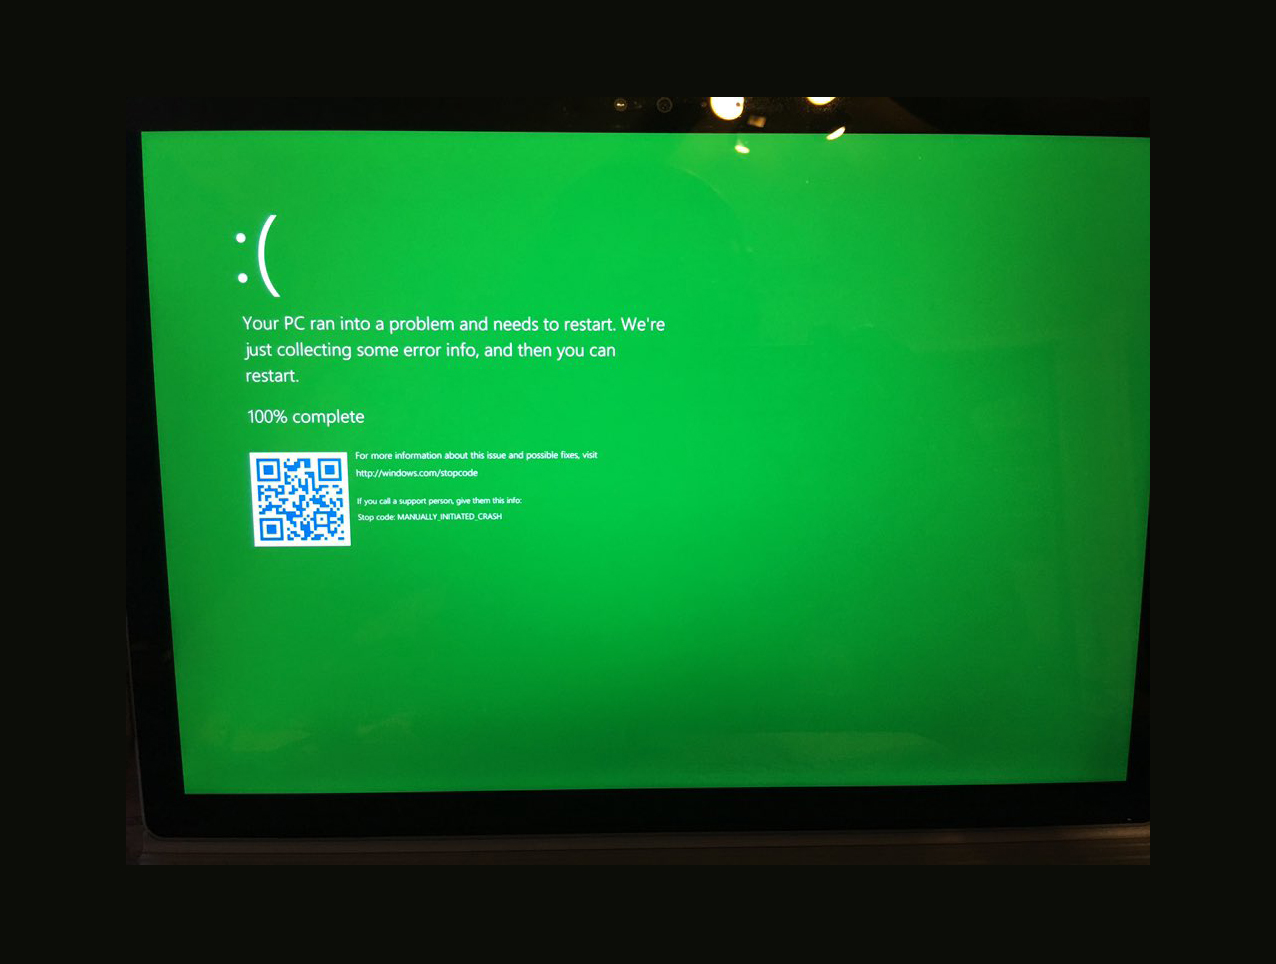 Behold the Windows 10 GSOD -- Green Screen of Death